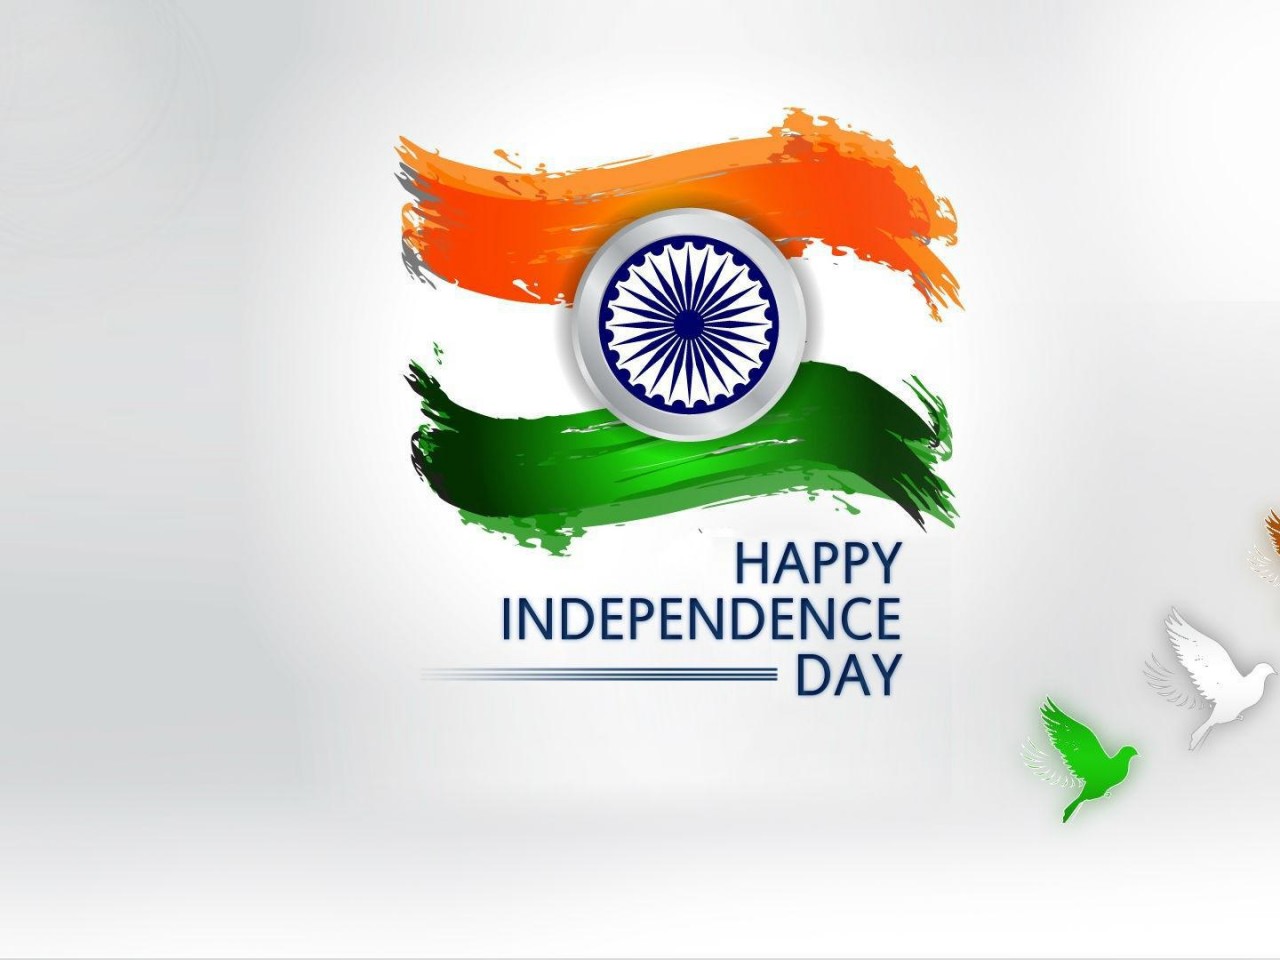 happy independence day wallpaper,logo,flag,graphics,graphic design,font